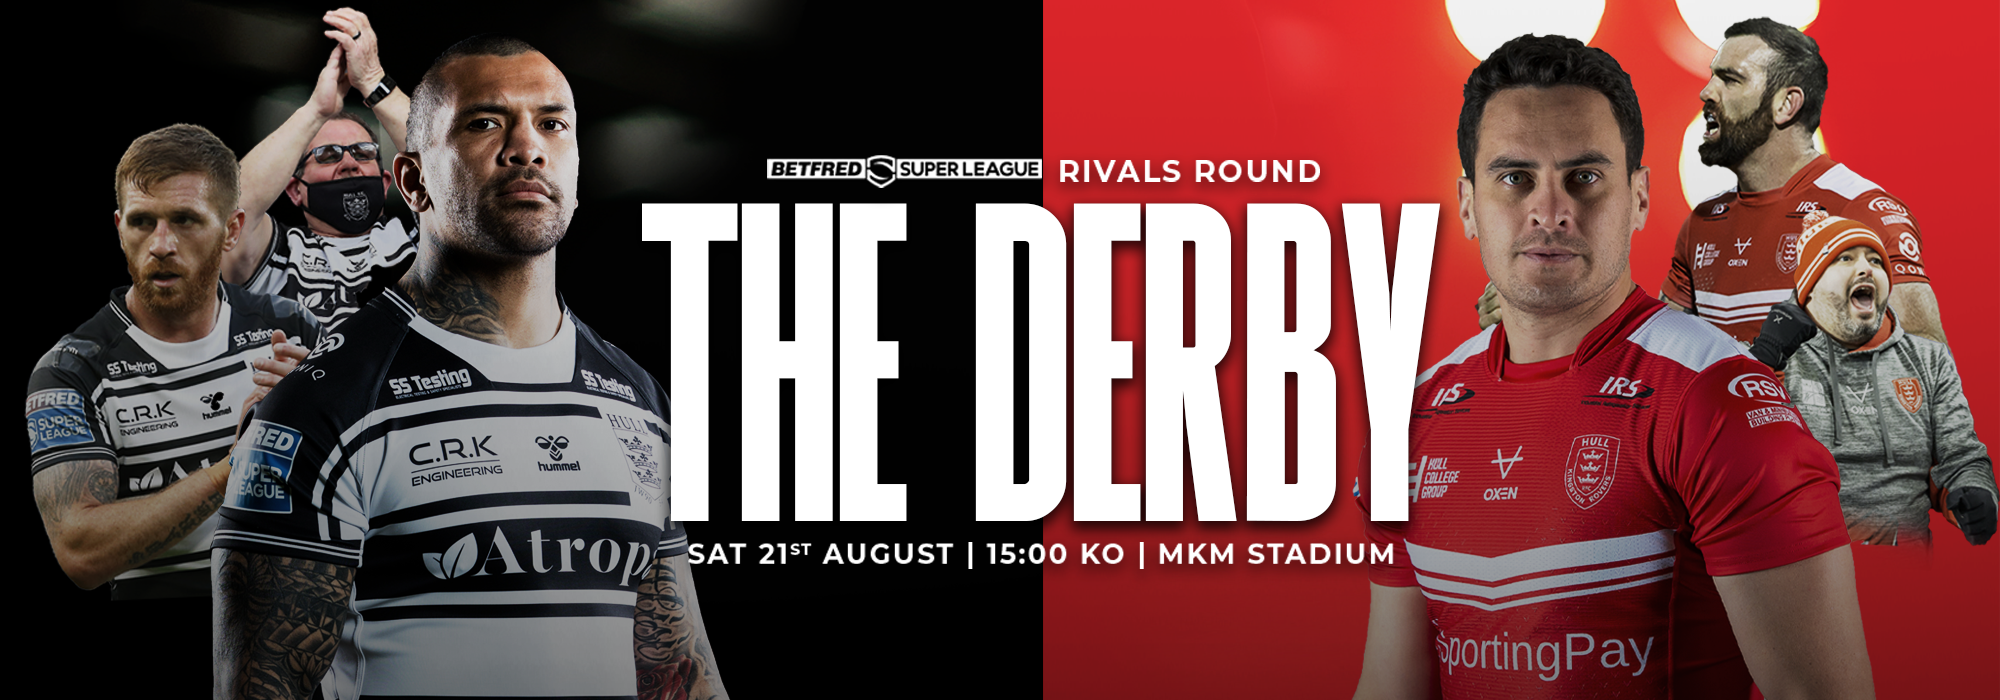 #DerbyDay Tickets Selling Fast – South Stand Unreserved Tickets Available In Store